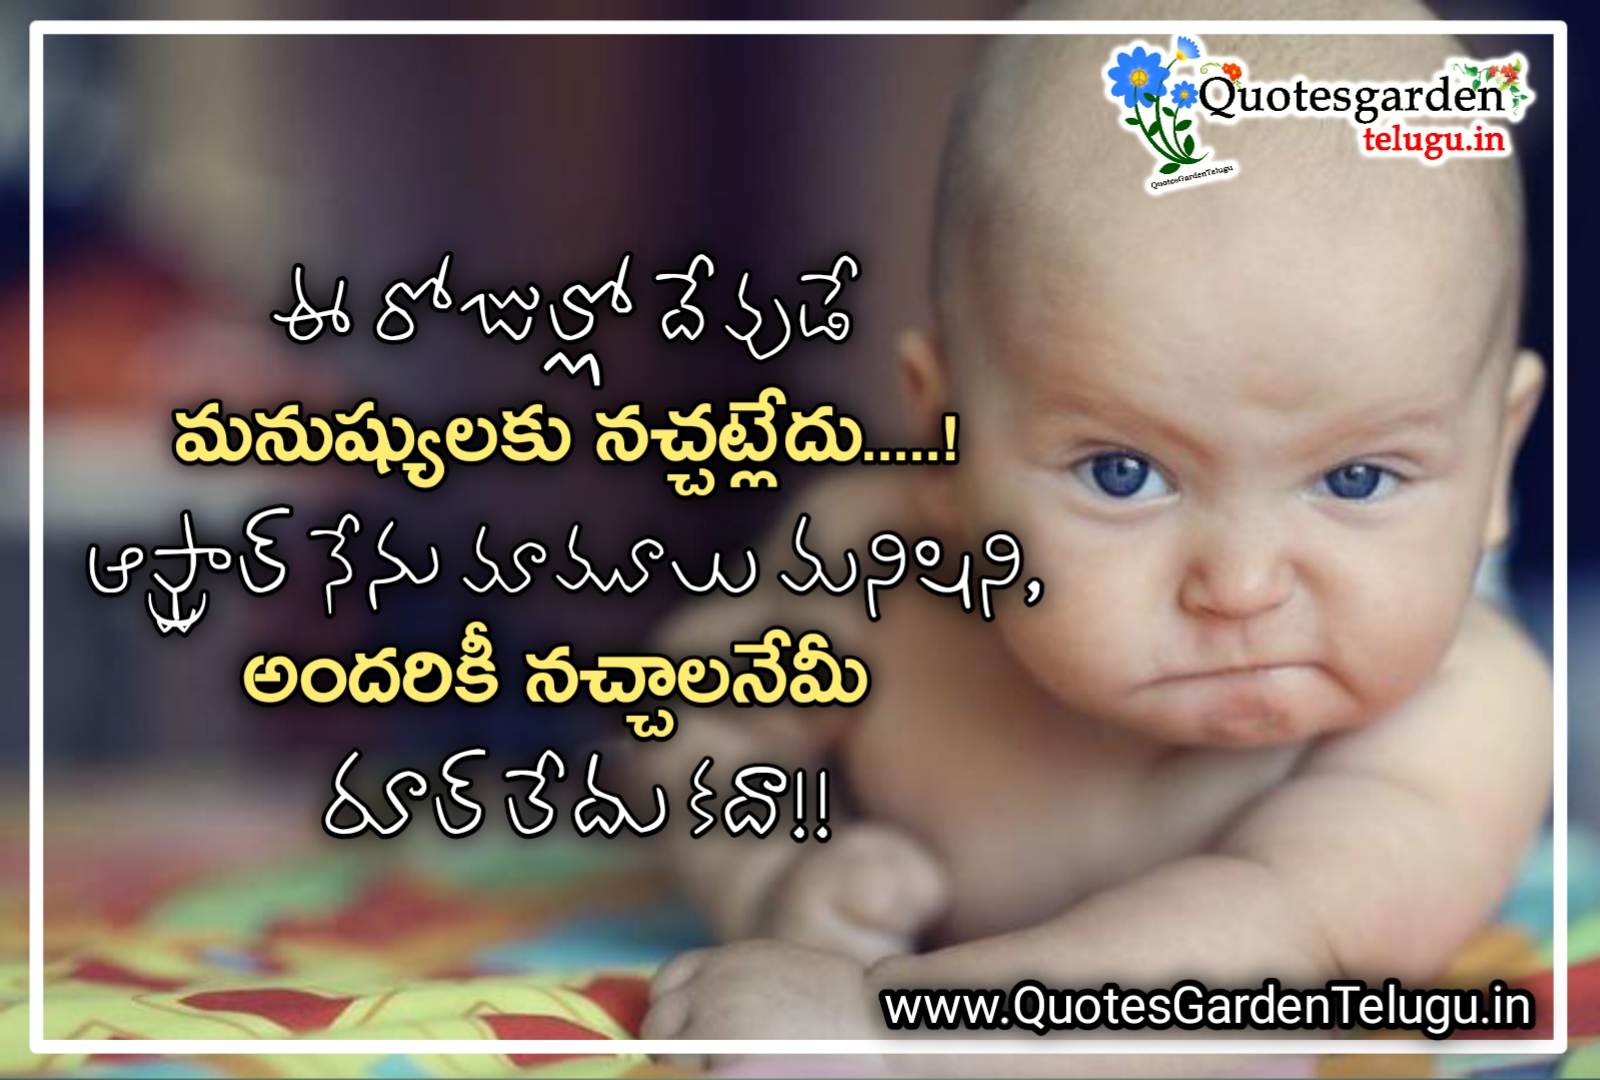 Inspirational Quotes in Telugu for Students | QUOTES GARDEN TELUGU ...